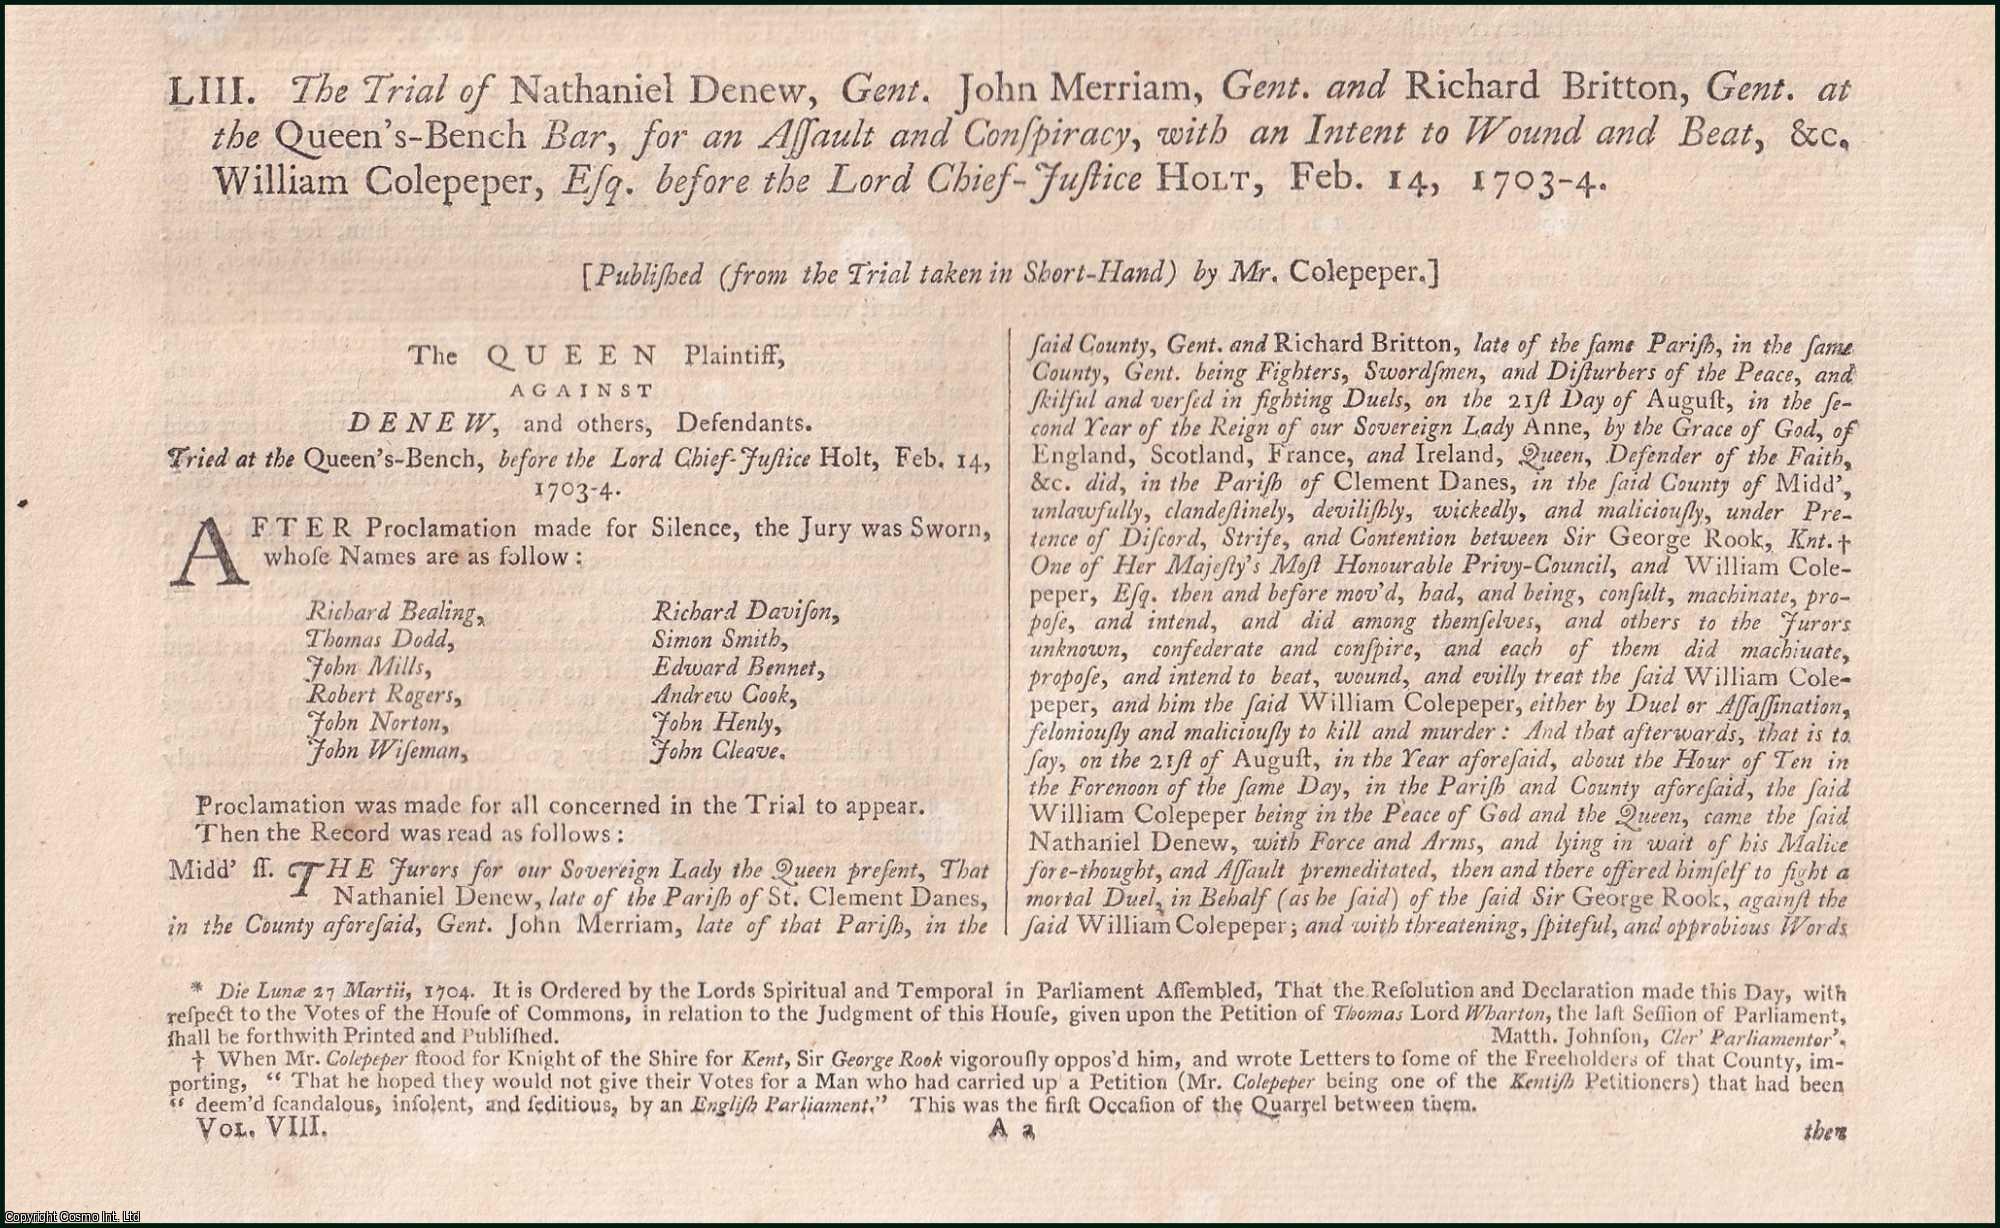 [Trial]. - The Trial of Nathaniel Denew, Gent. John Merriam, Gent. and Richard Britton, Gent. at the Queen's-Bench Bar, for an Assault and Conspiracy, with an Intent to Wound and Beat, &c. William Colepeper, Esq. before the Lord Chief-Justice Holt, February 14th, 1703-04. An original report from the Collected State Trials.